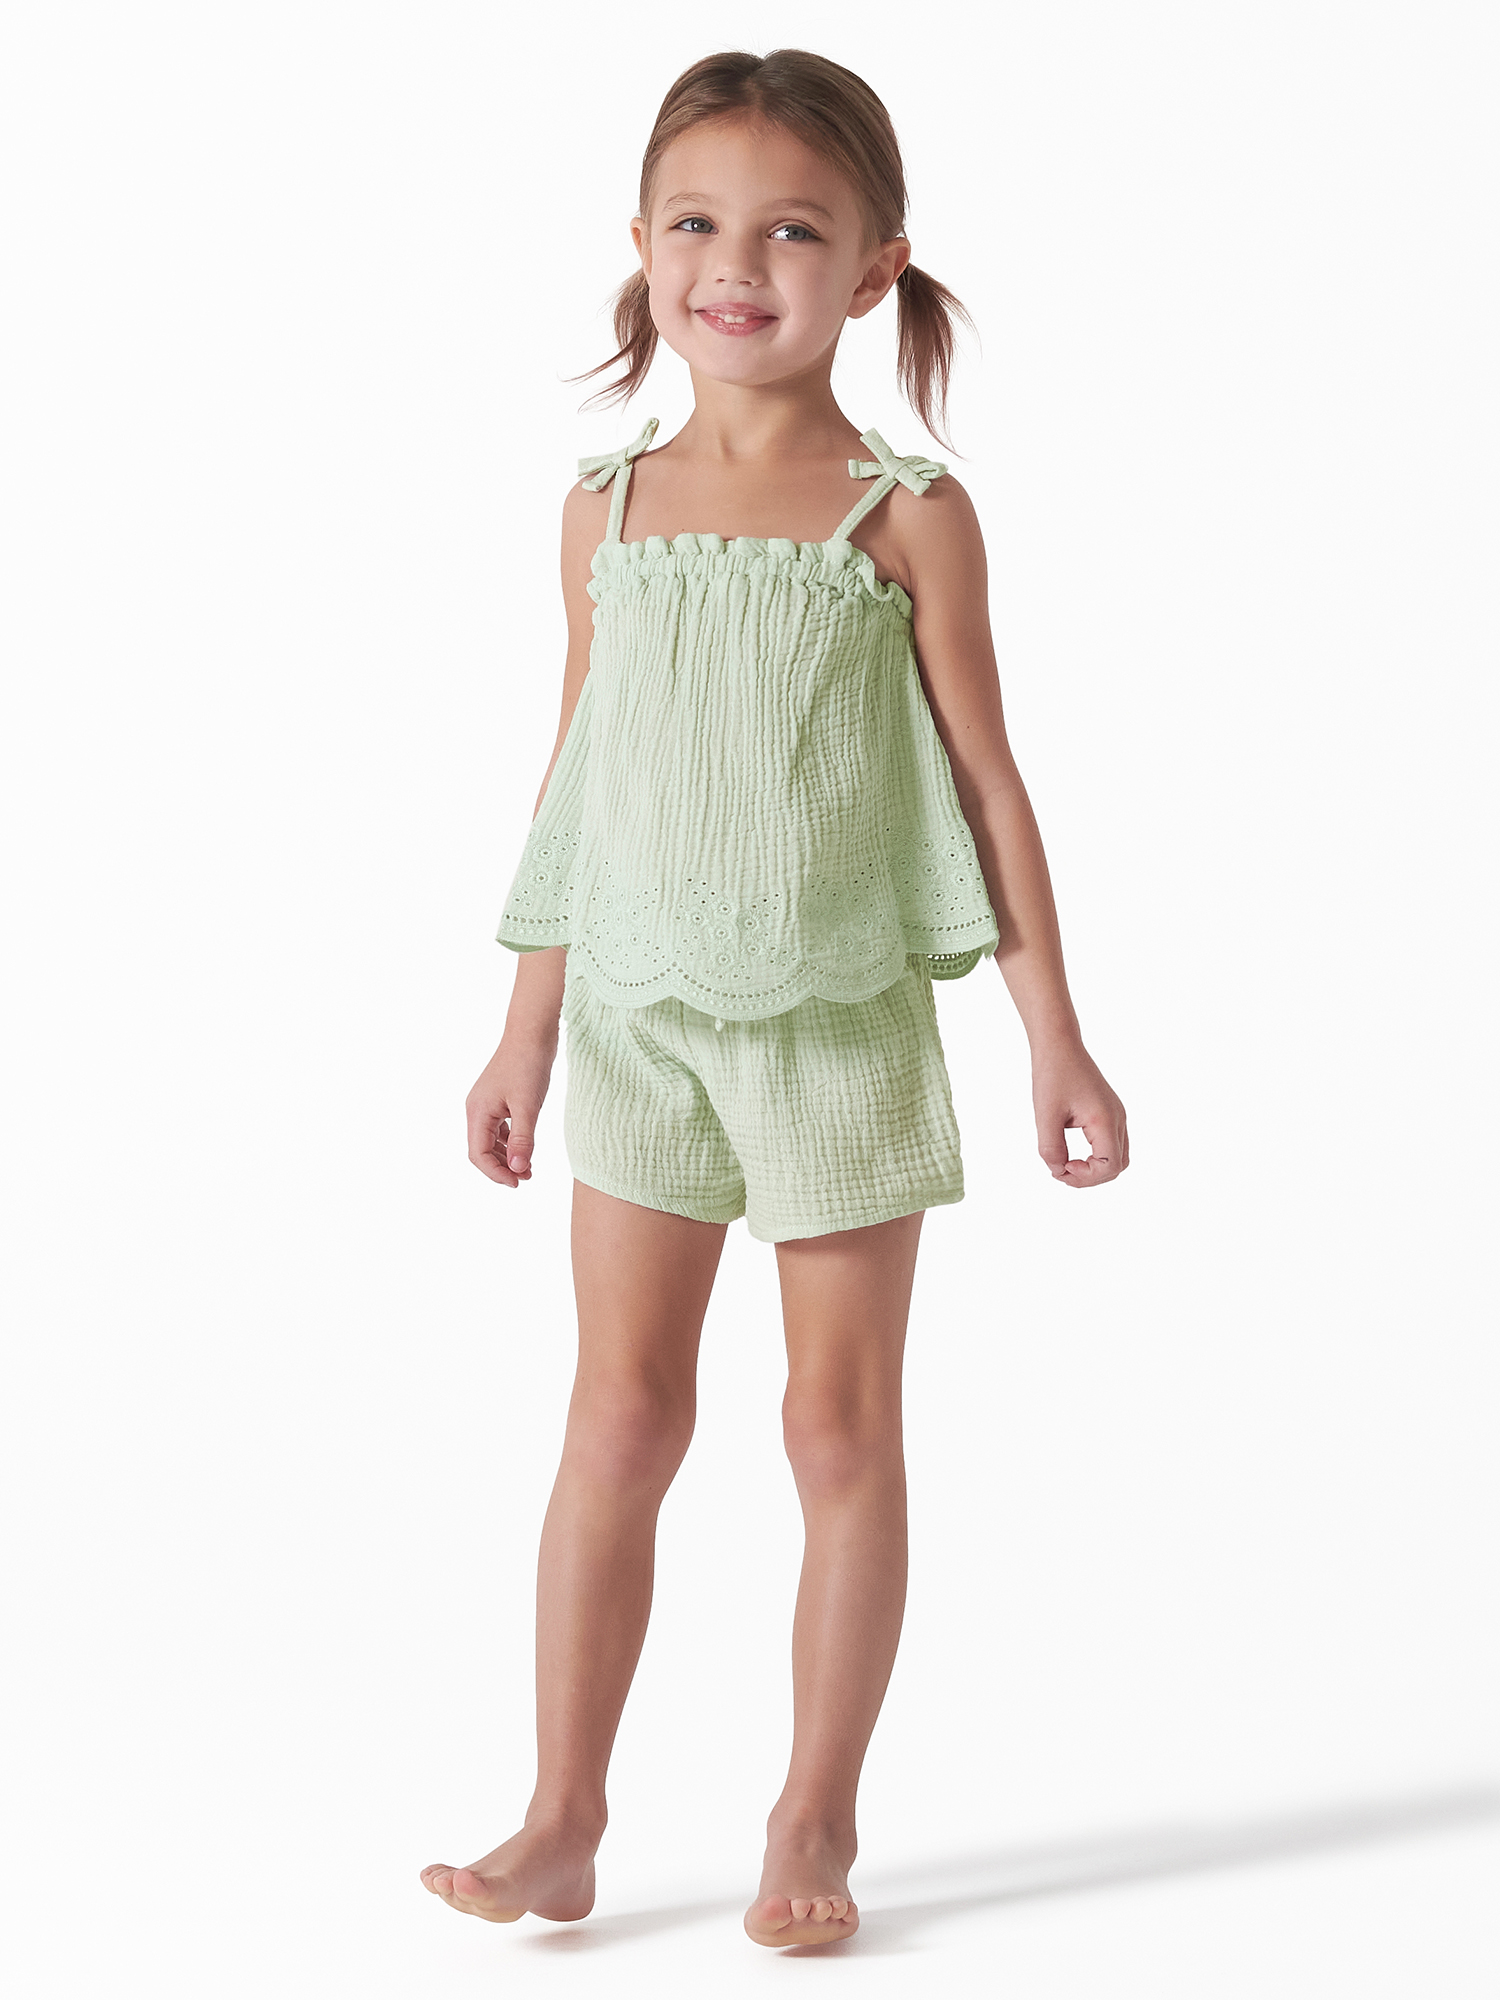 Modern Moments by Gerber Toddler Girl Eyelet Trim Gauze Top and Shorts Set, 2-Piece, Sizes 12M-5T - image 1 of 13